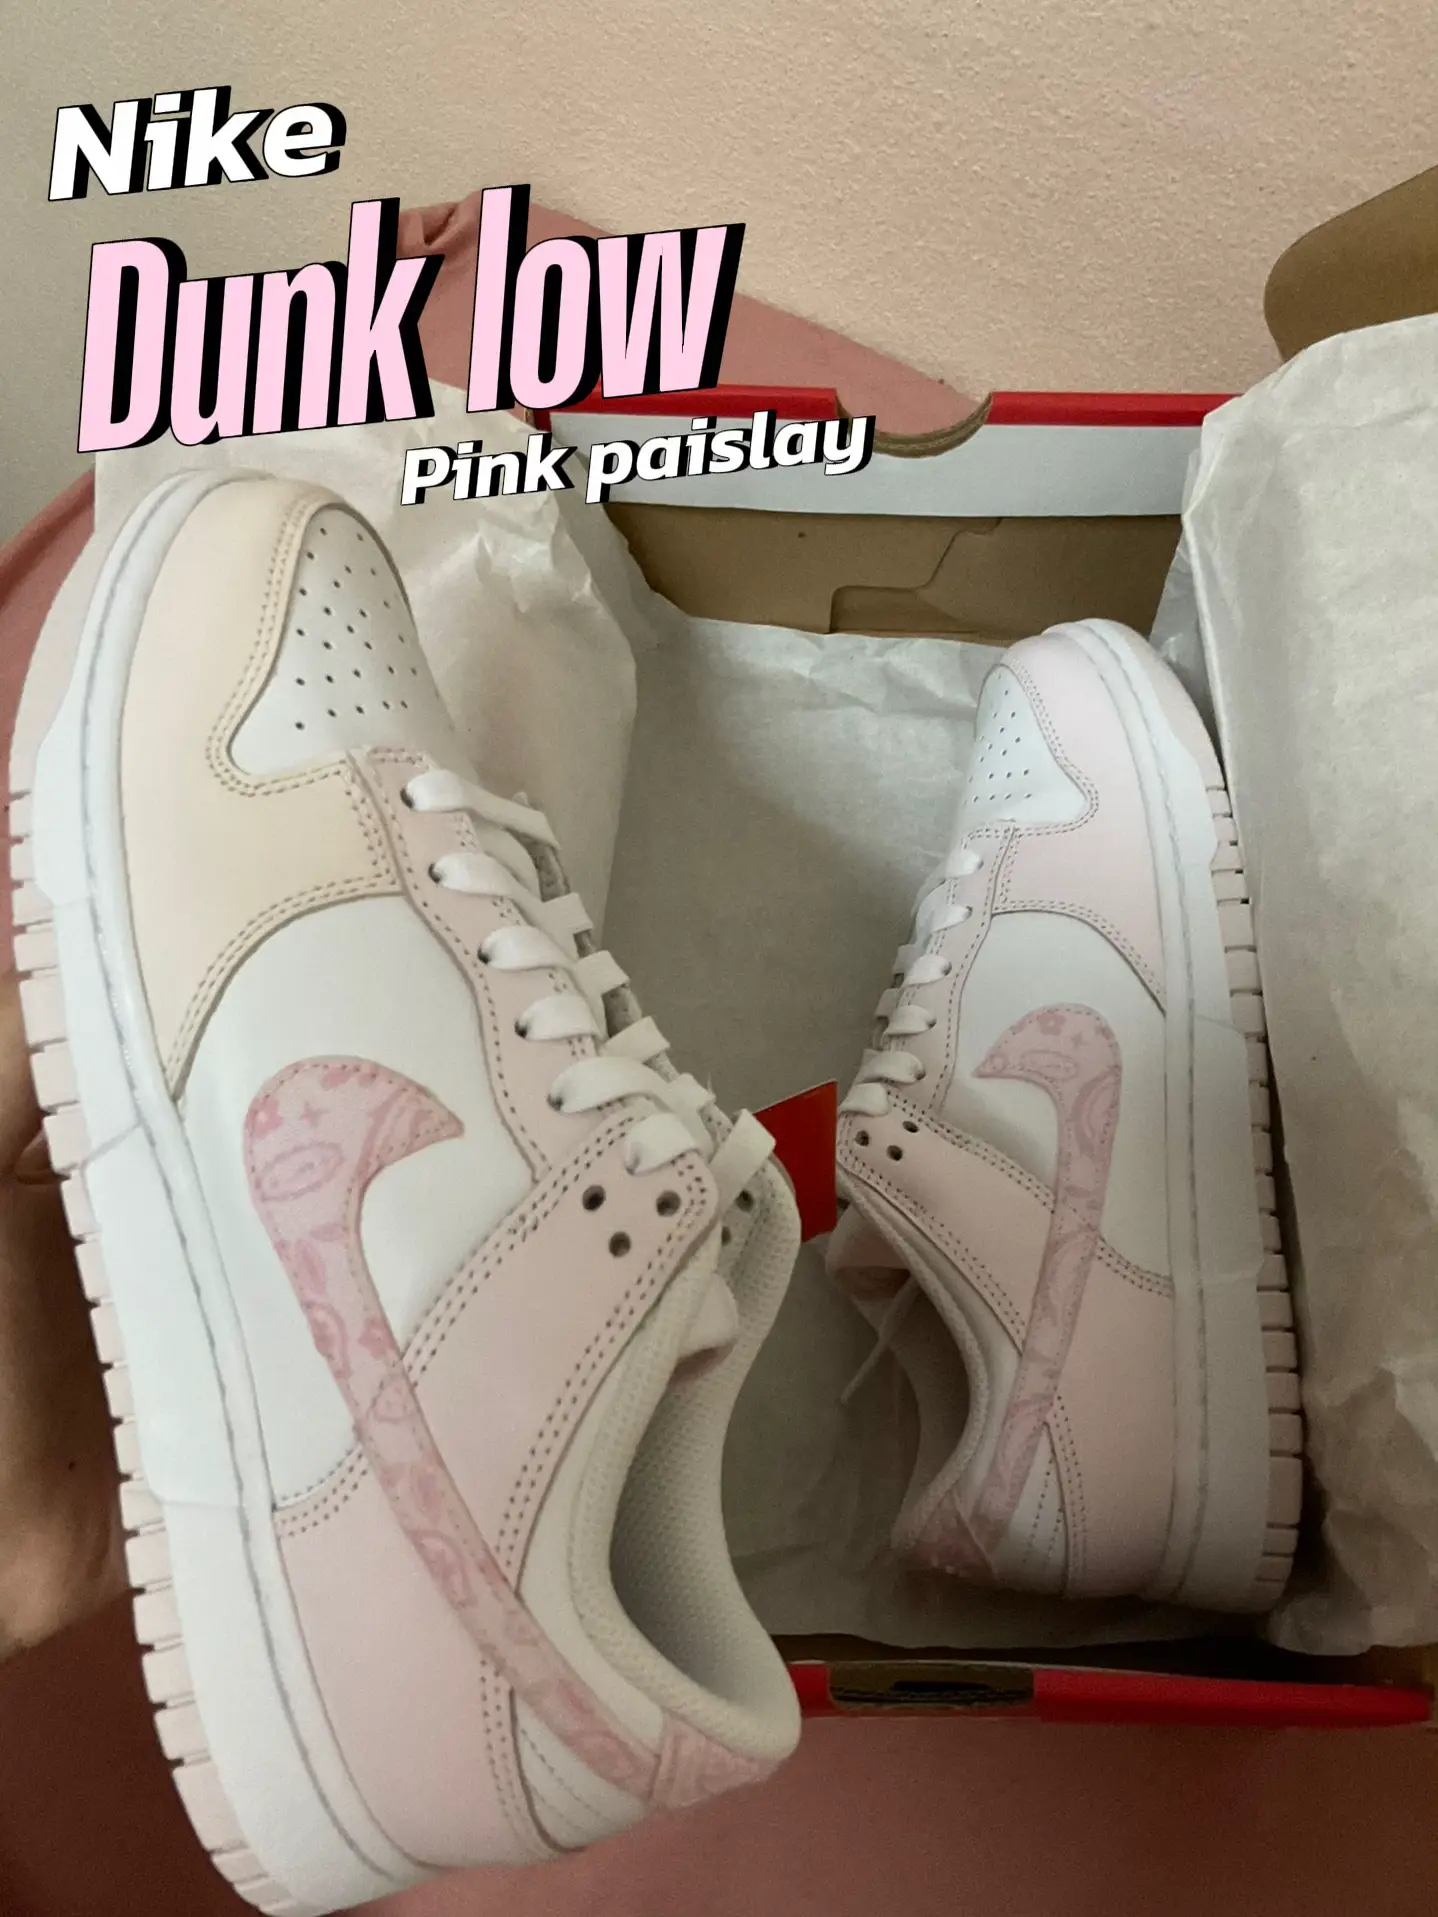 Nike dunk low pink paisley💖🌷 | Gallery posted by Cinnnaoy | Lemon8